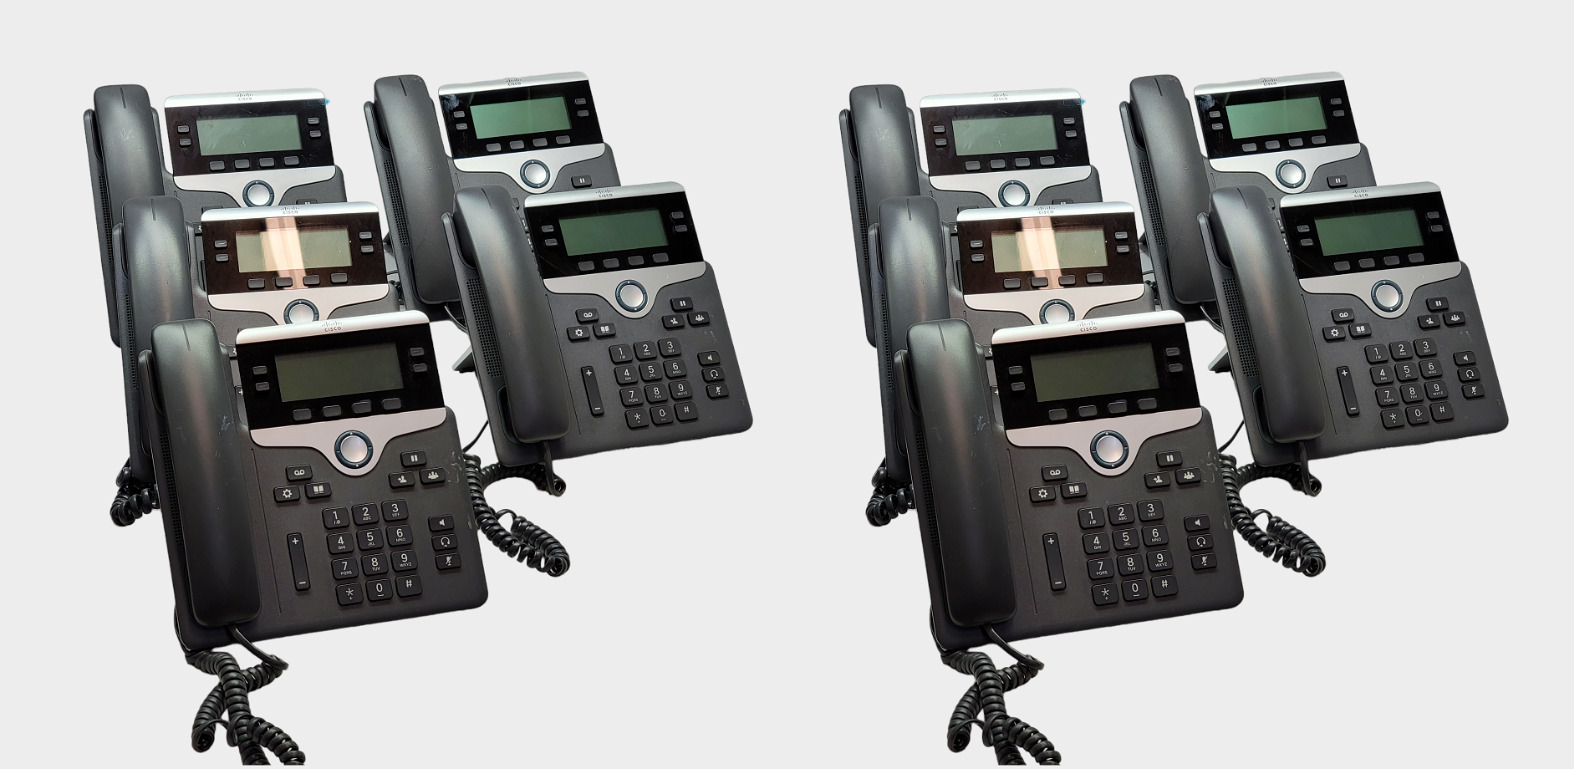 Cisco 7841 CP-7841-K9 VoIP Phone With Stand 4 Line VOIP Phone Lot of 10